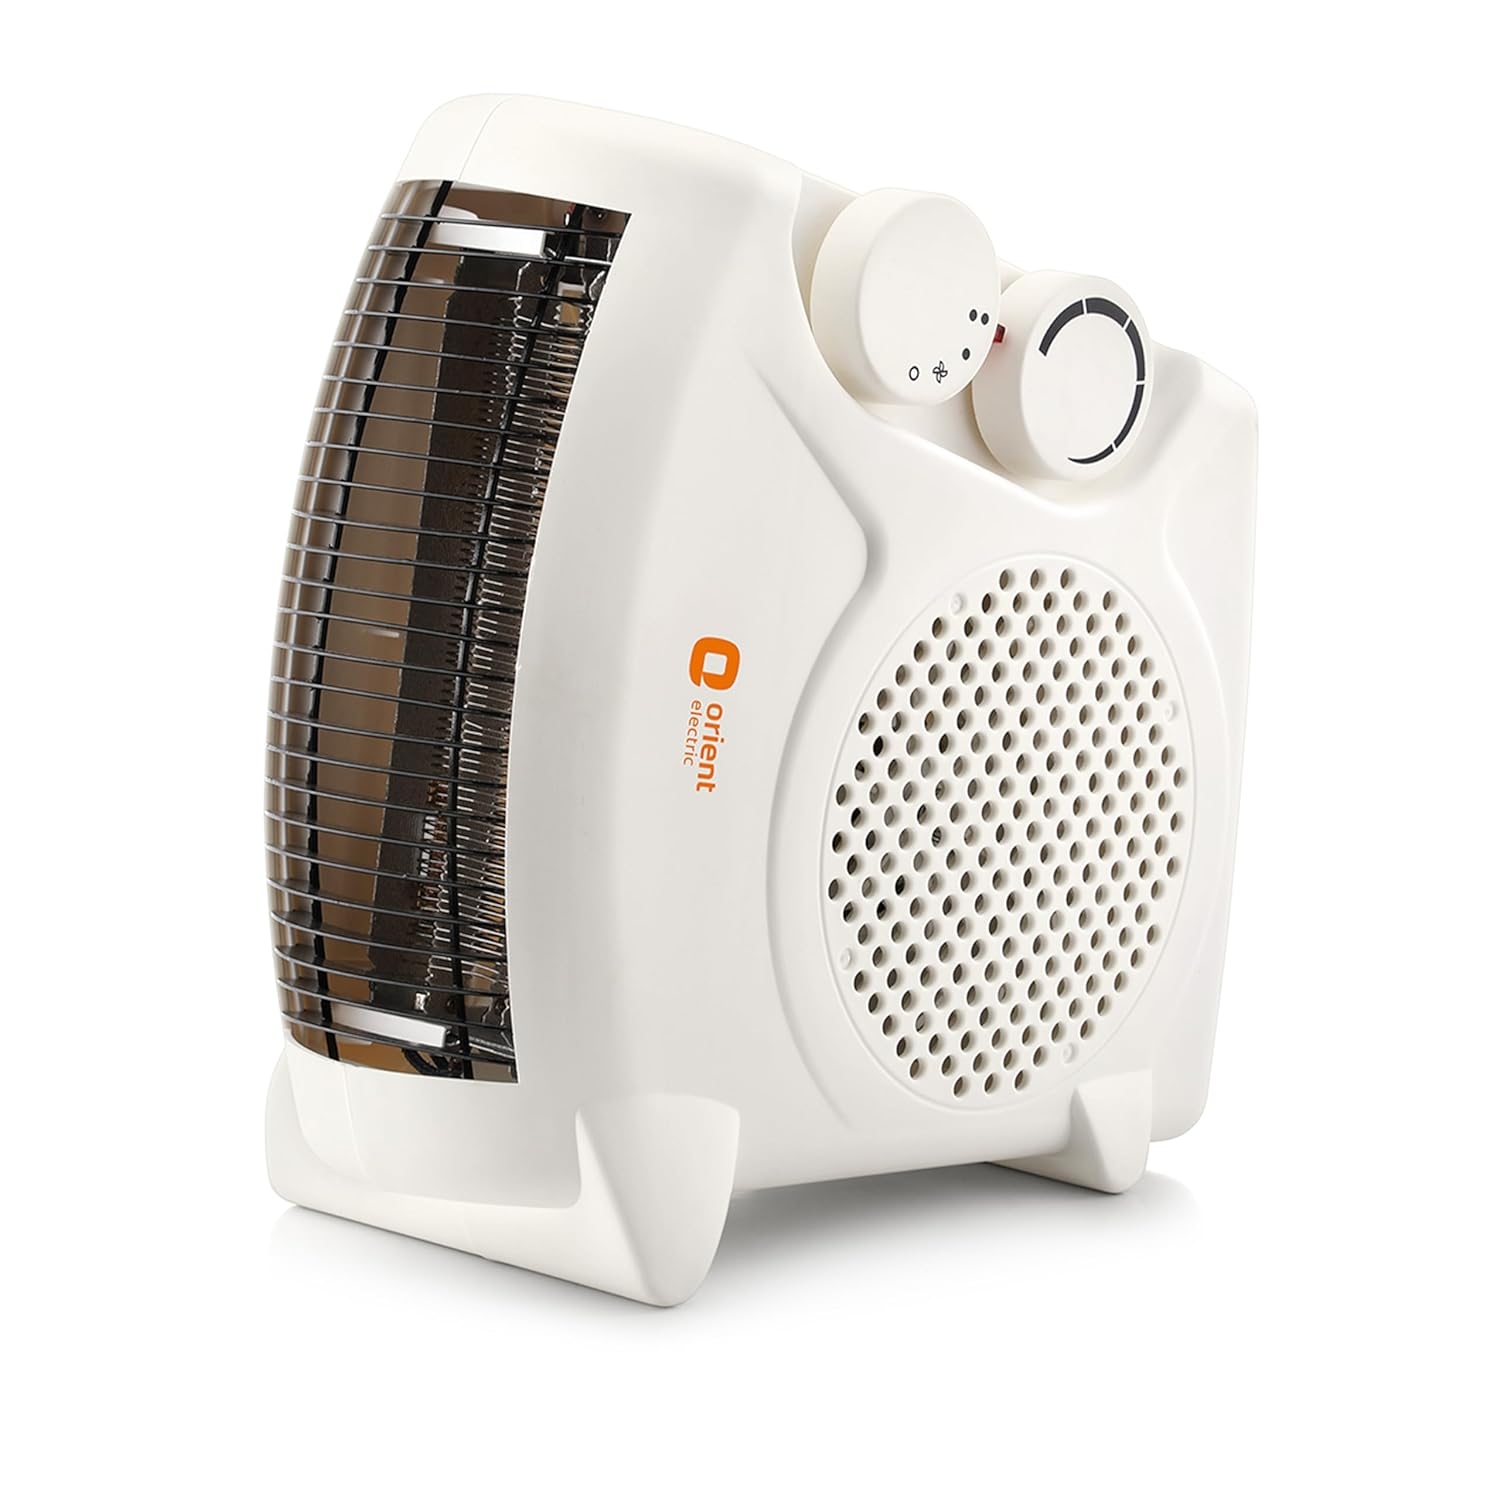 Orient electric Areva fan heater |2000W power |2 heating modes |Compact design |1 year replacement warranty